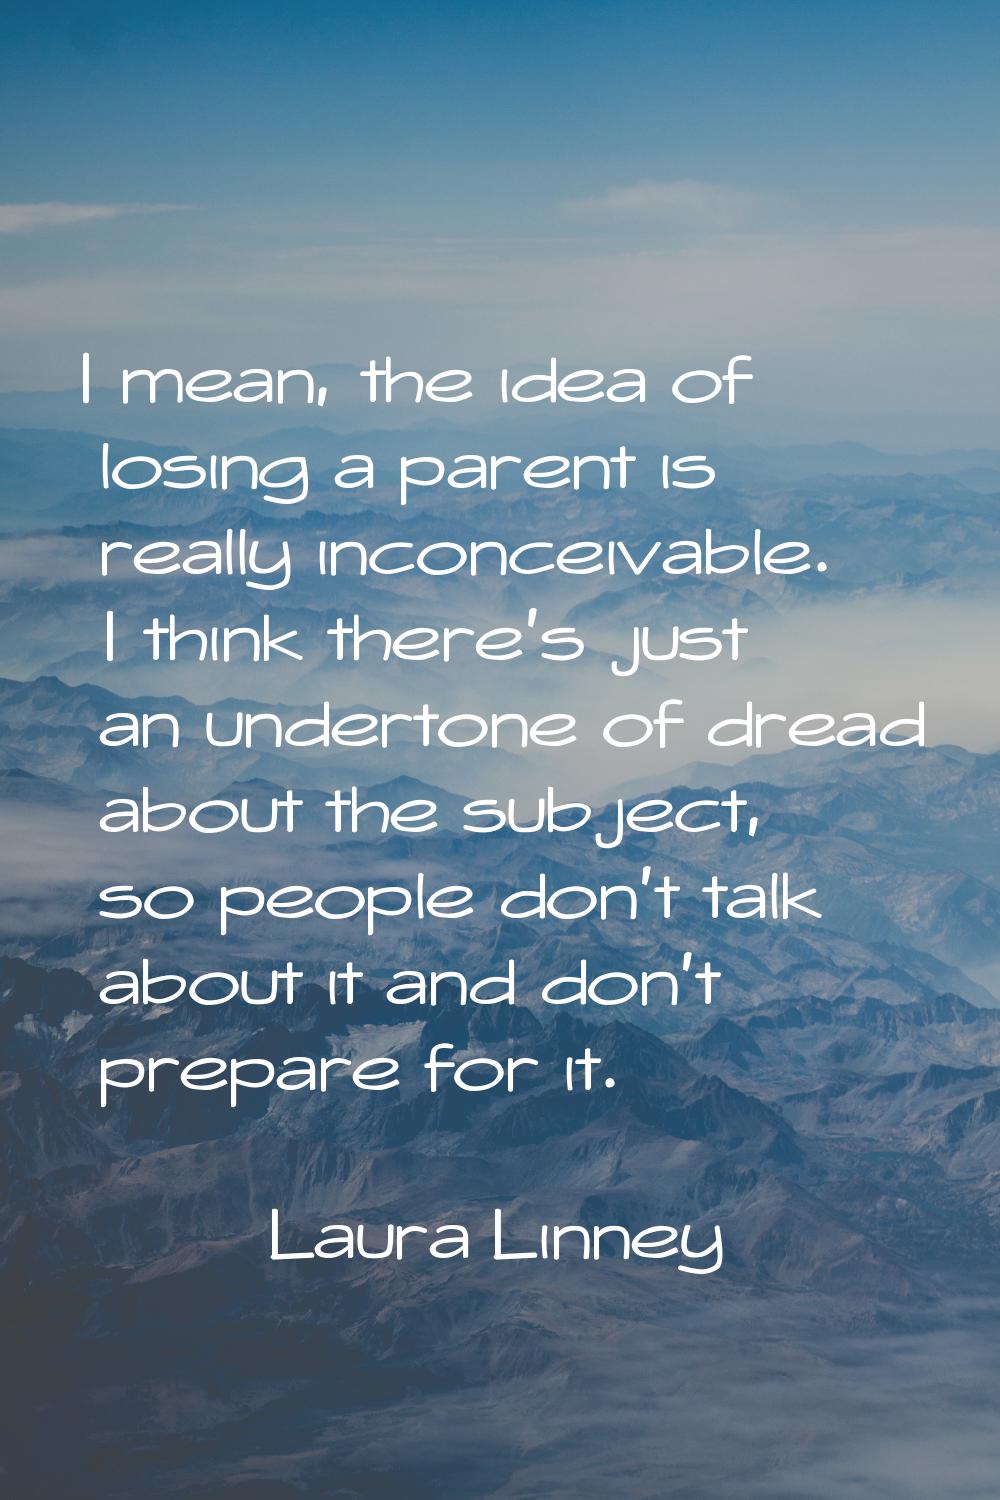 I mean, the idea of losing a parent is really inconceivable. I think there's just an undertone of d